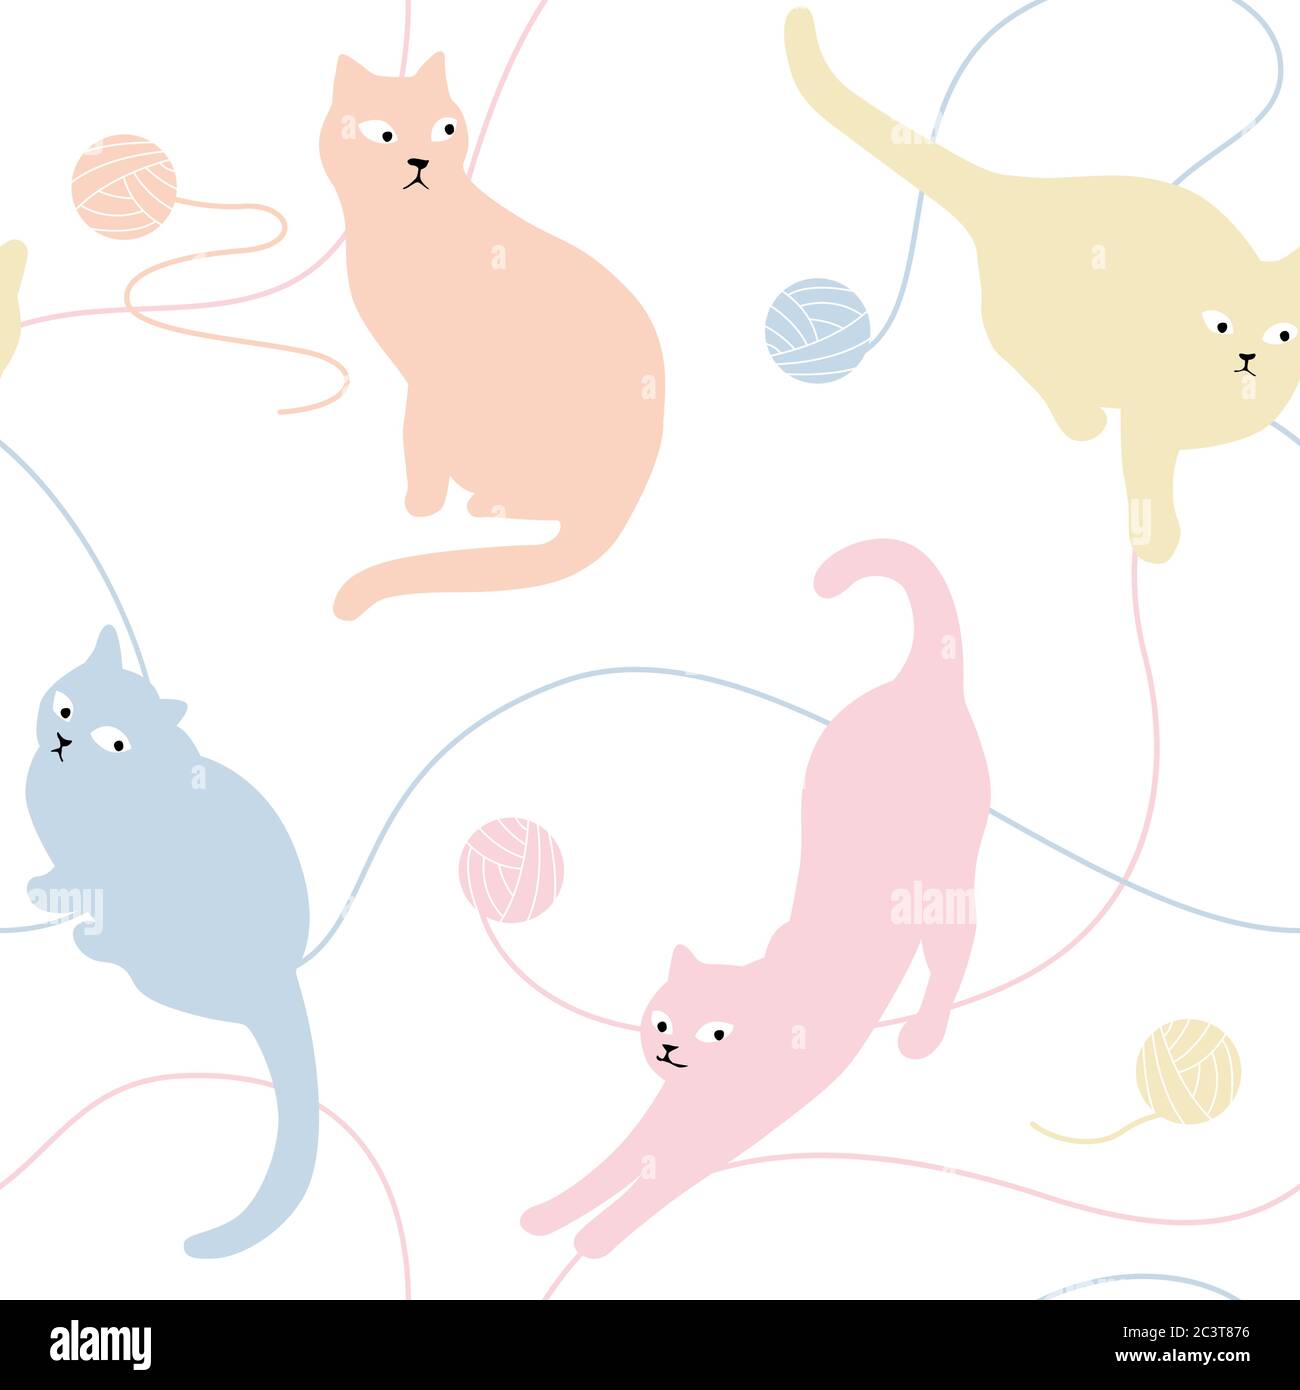 Cat Silhouette Playing Knitting Yarn Ball Seamless Pattern, Multi Pastel Colors. Stock Vector